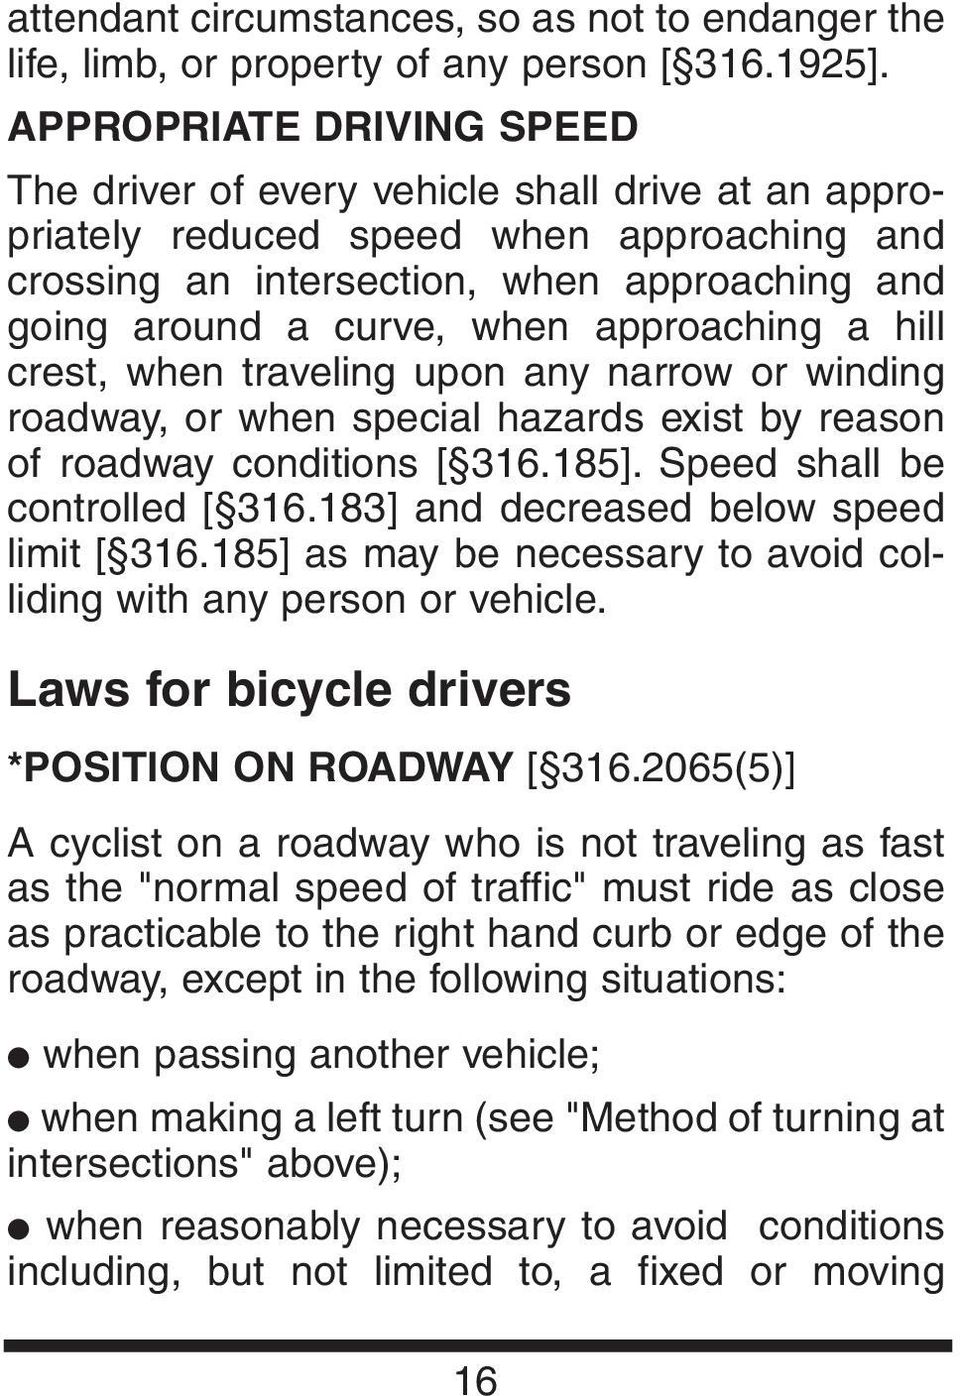 approaching a hill crest, when traveling upon any narrow or winding roadway, or when special hazards exist by reason of roadway conditions [ 316.185]. Speed shall be controlled [ 316.